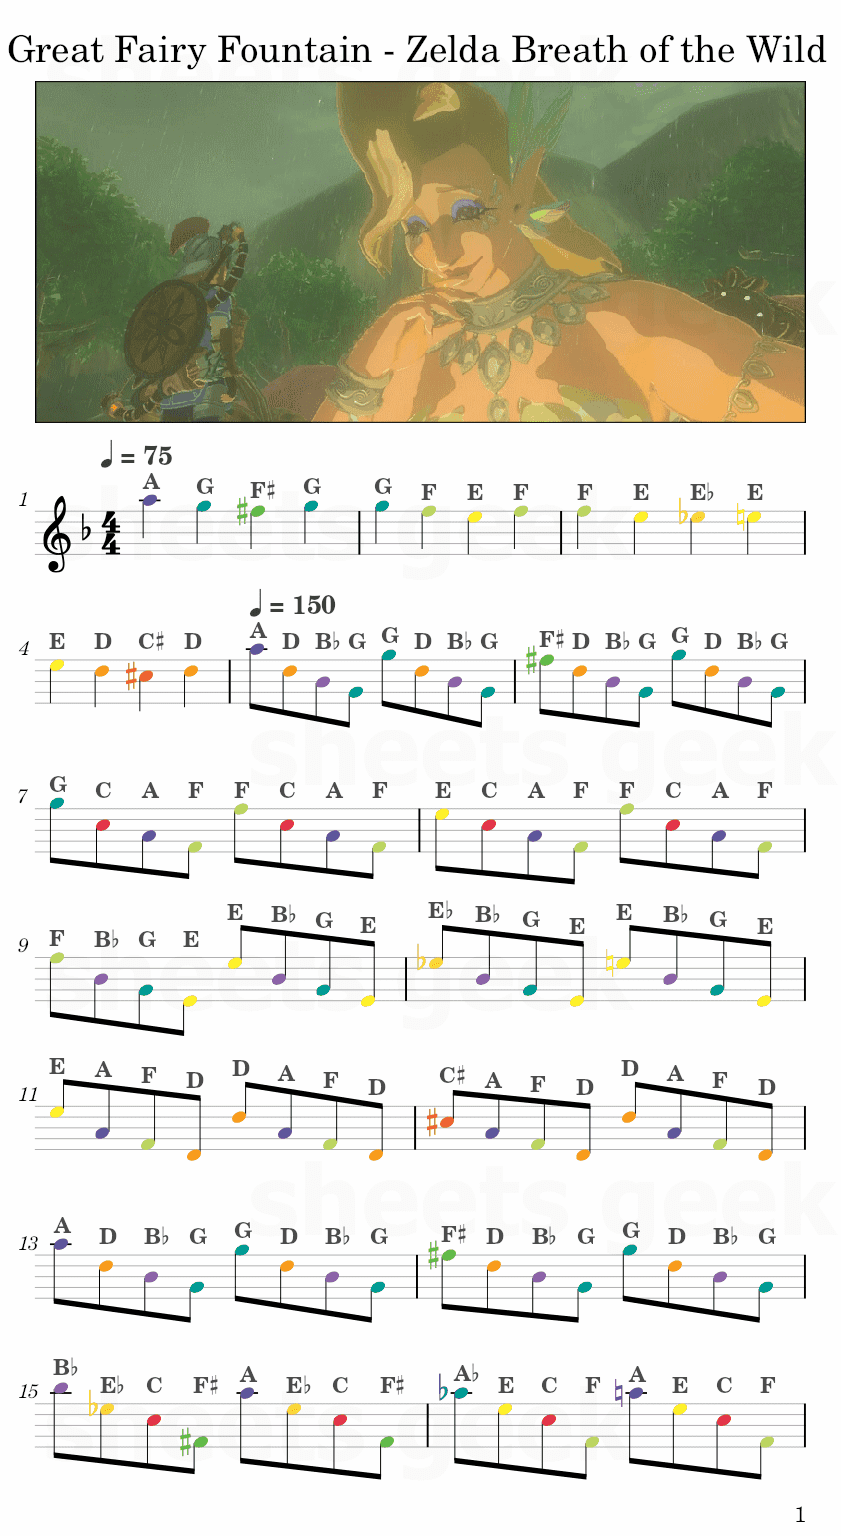 Great Fairy Fountain - The Legend of Zelda: Breath of the Wild great fairy theme Easy Sheet Music Free for piano, keyboard, flute, violin, sax, cello page 1